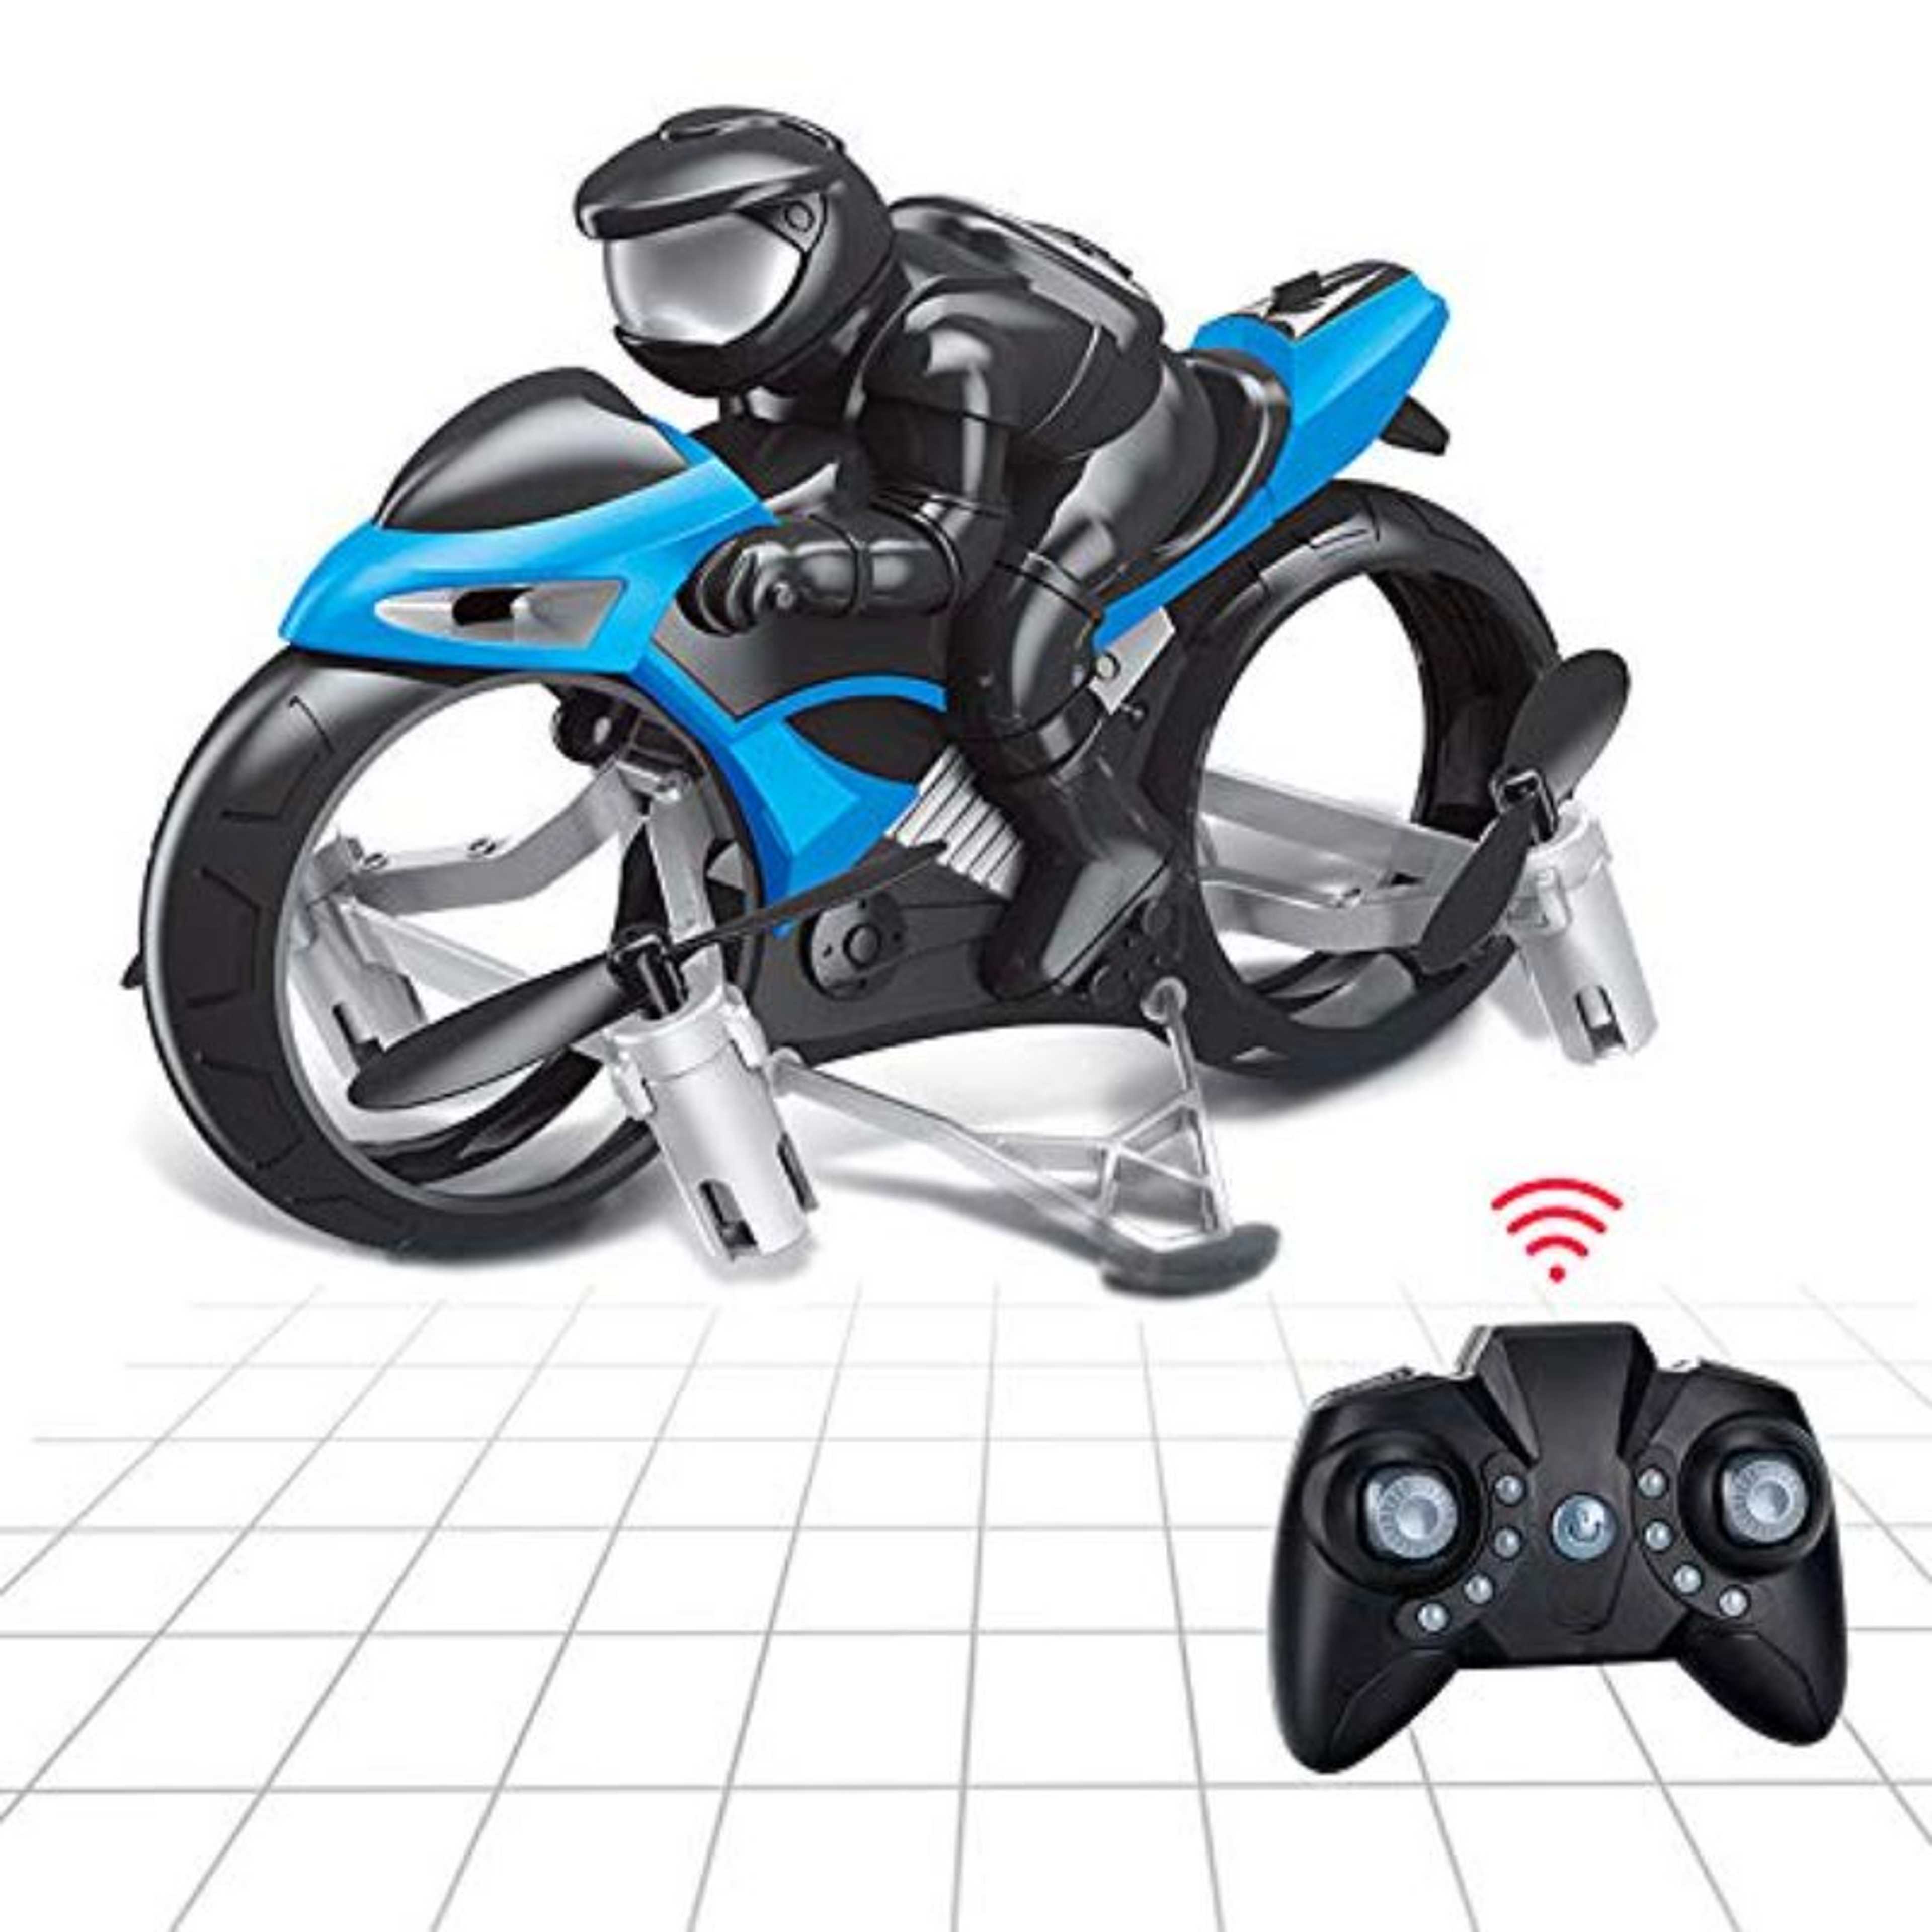 Remote Control Flying Motorcycle RC Drone, 2.4GHz 2in1 Land & Air Headless Mini Quadcopter Drone Motorbike